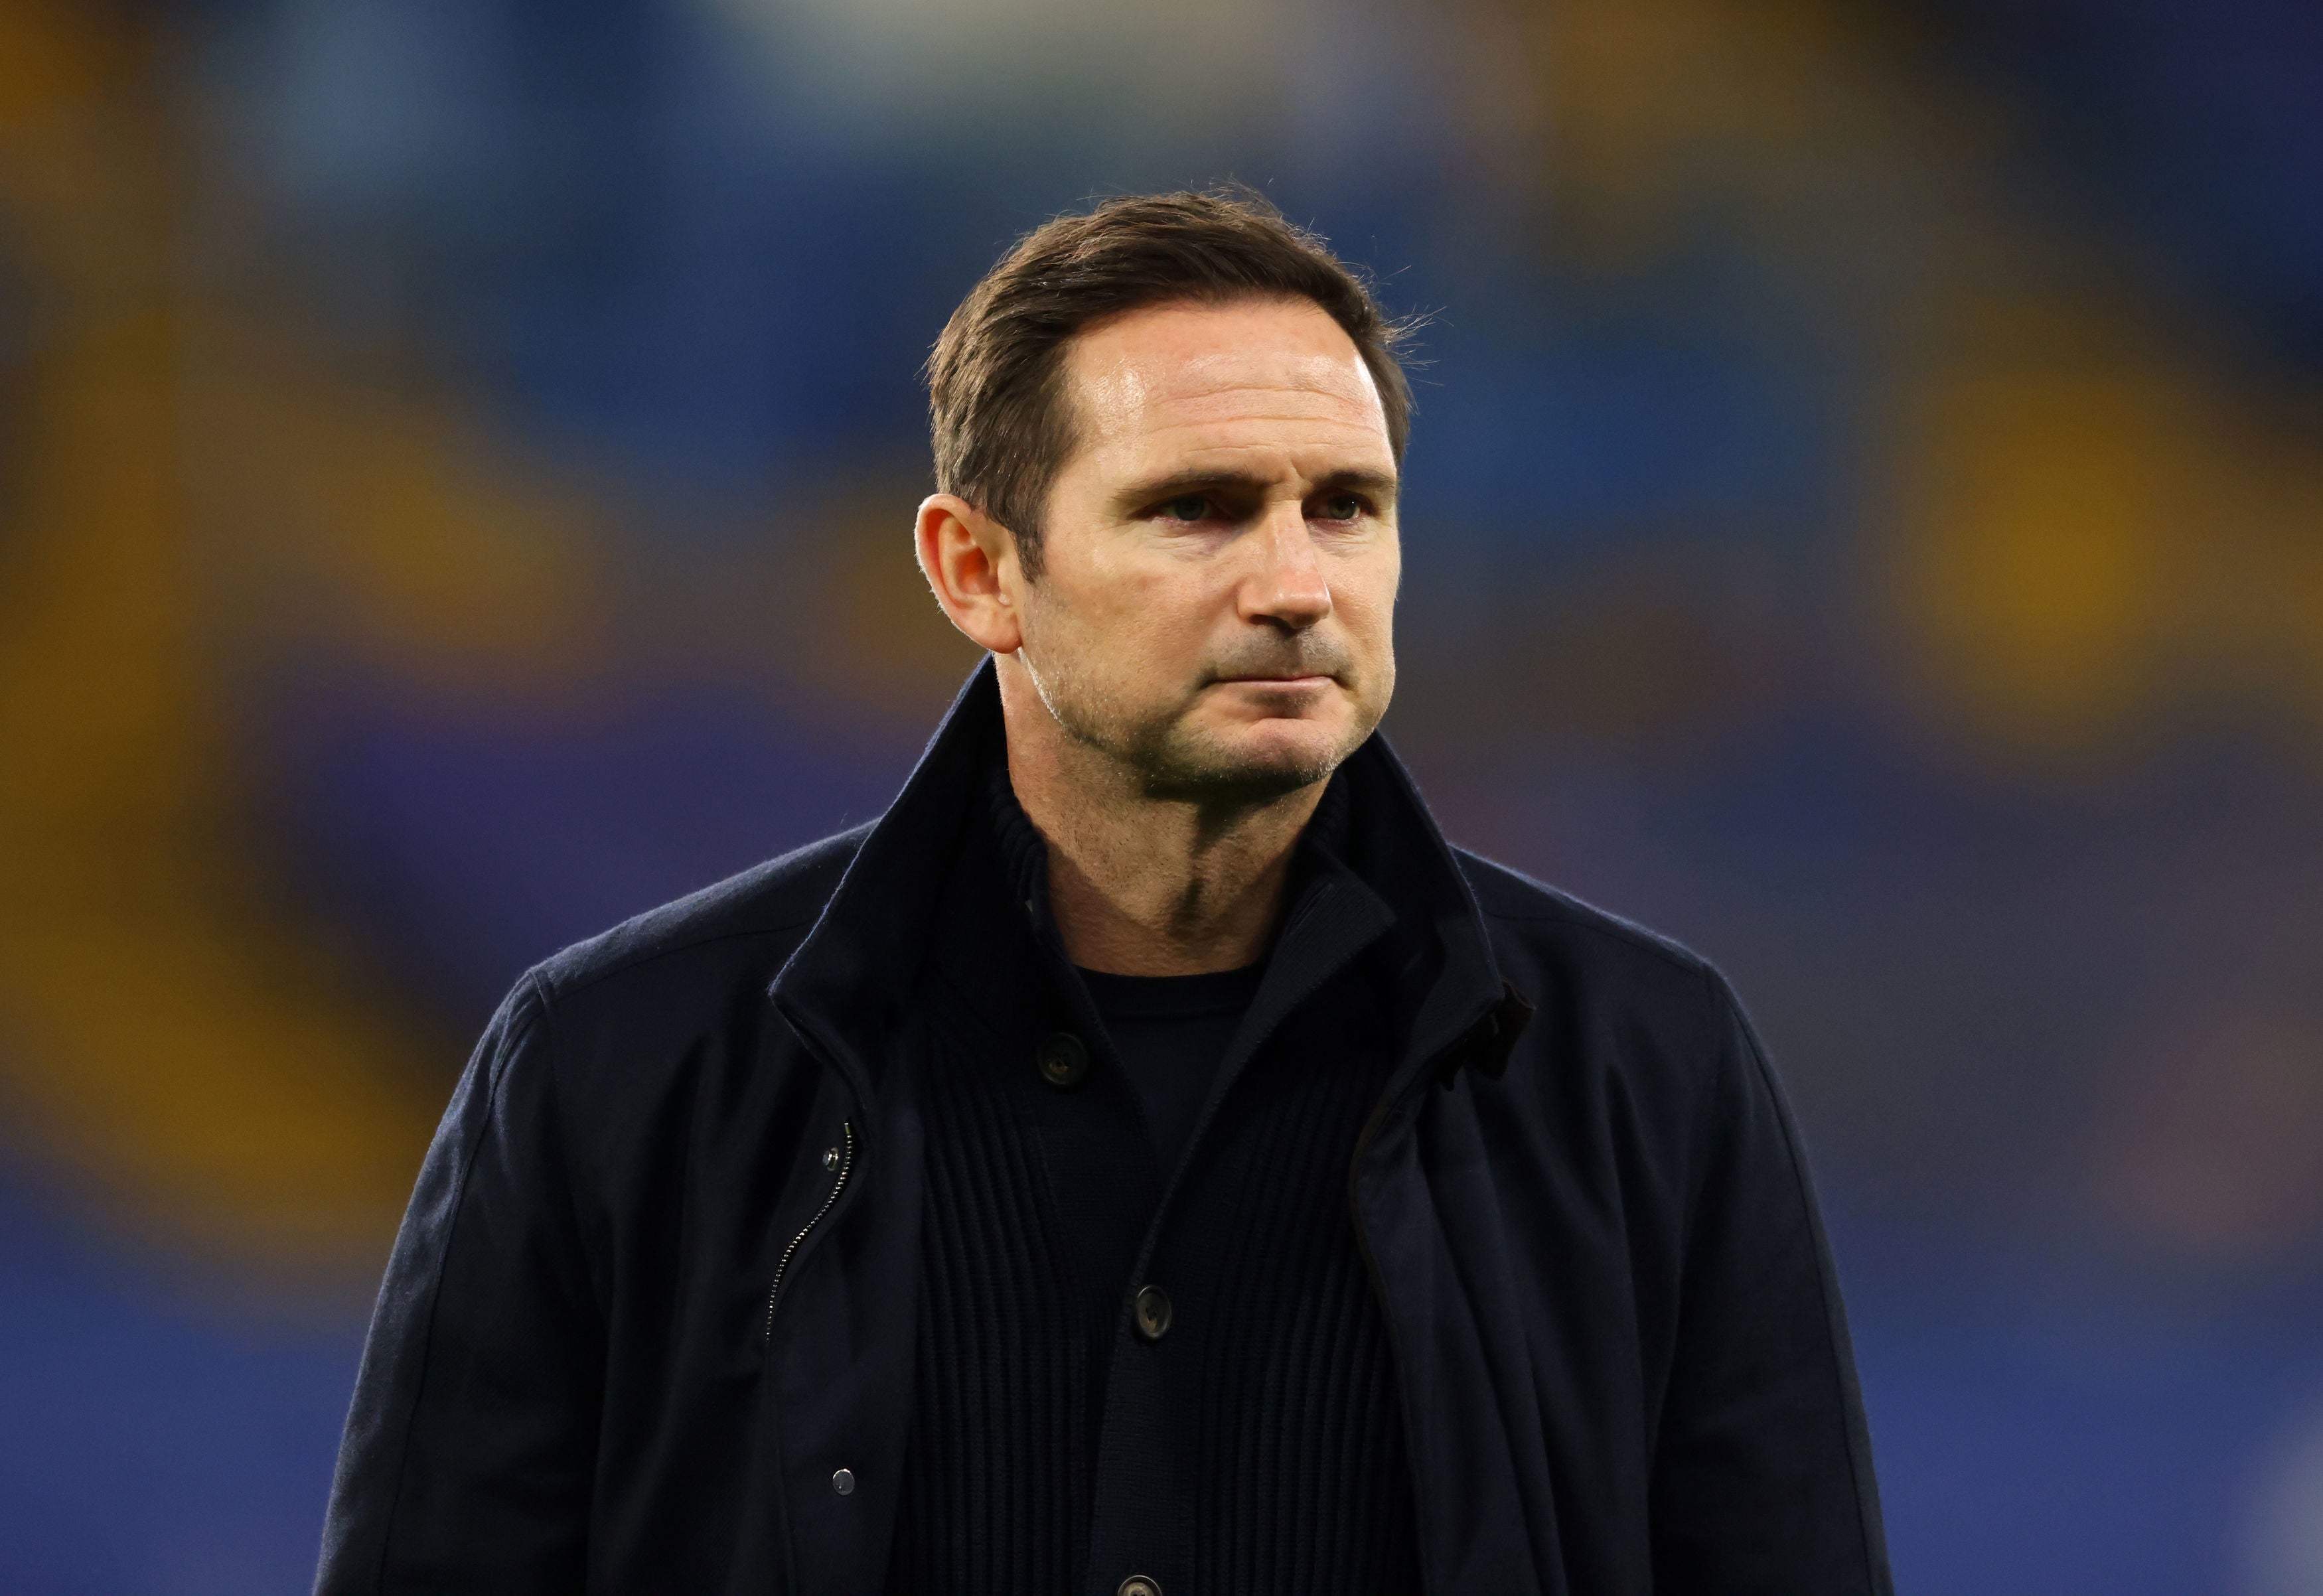 Frank Lampard’s time at Chelsea is up